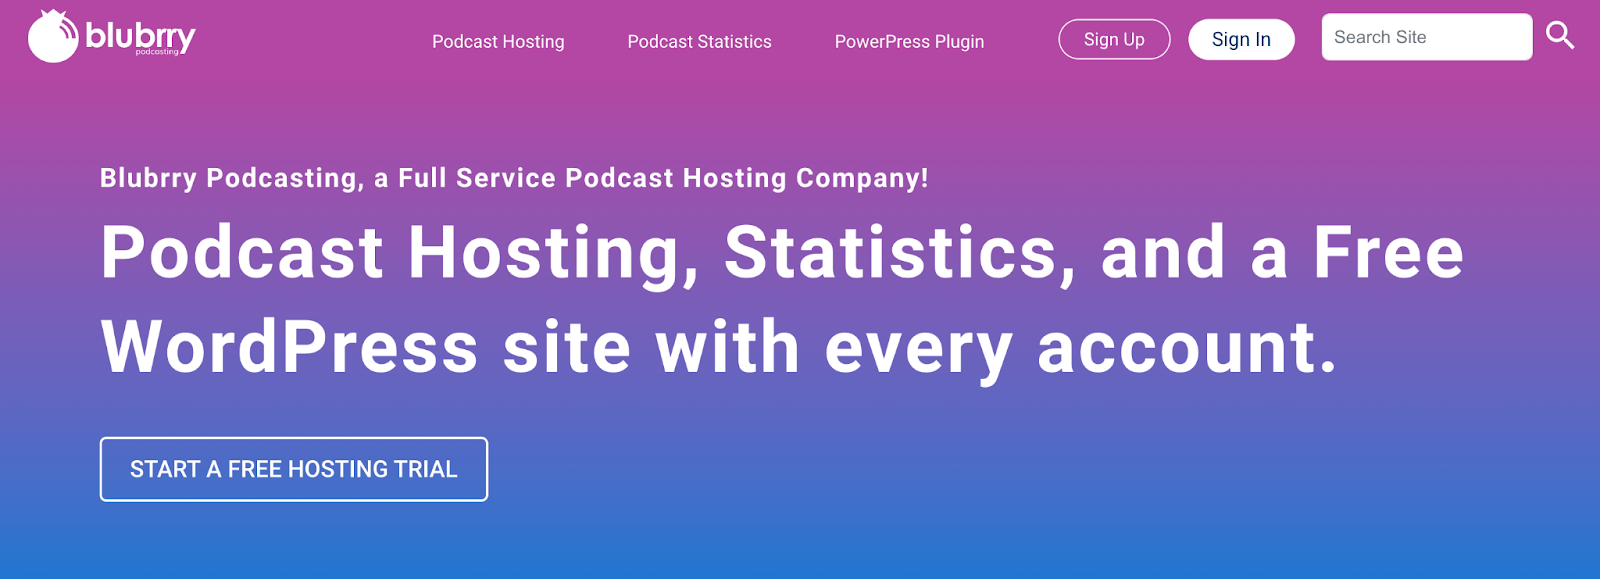 blubrry home page for podcast hosting